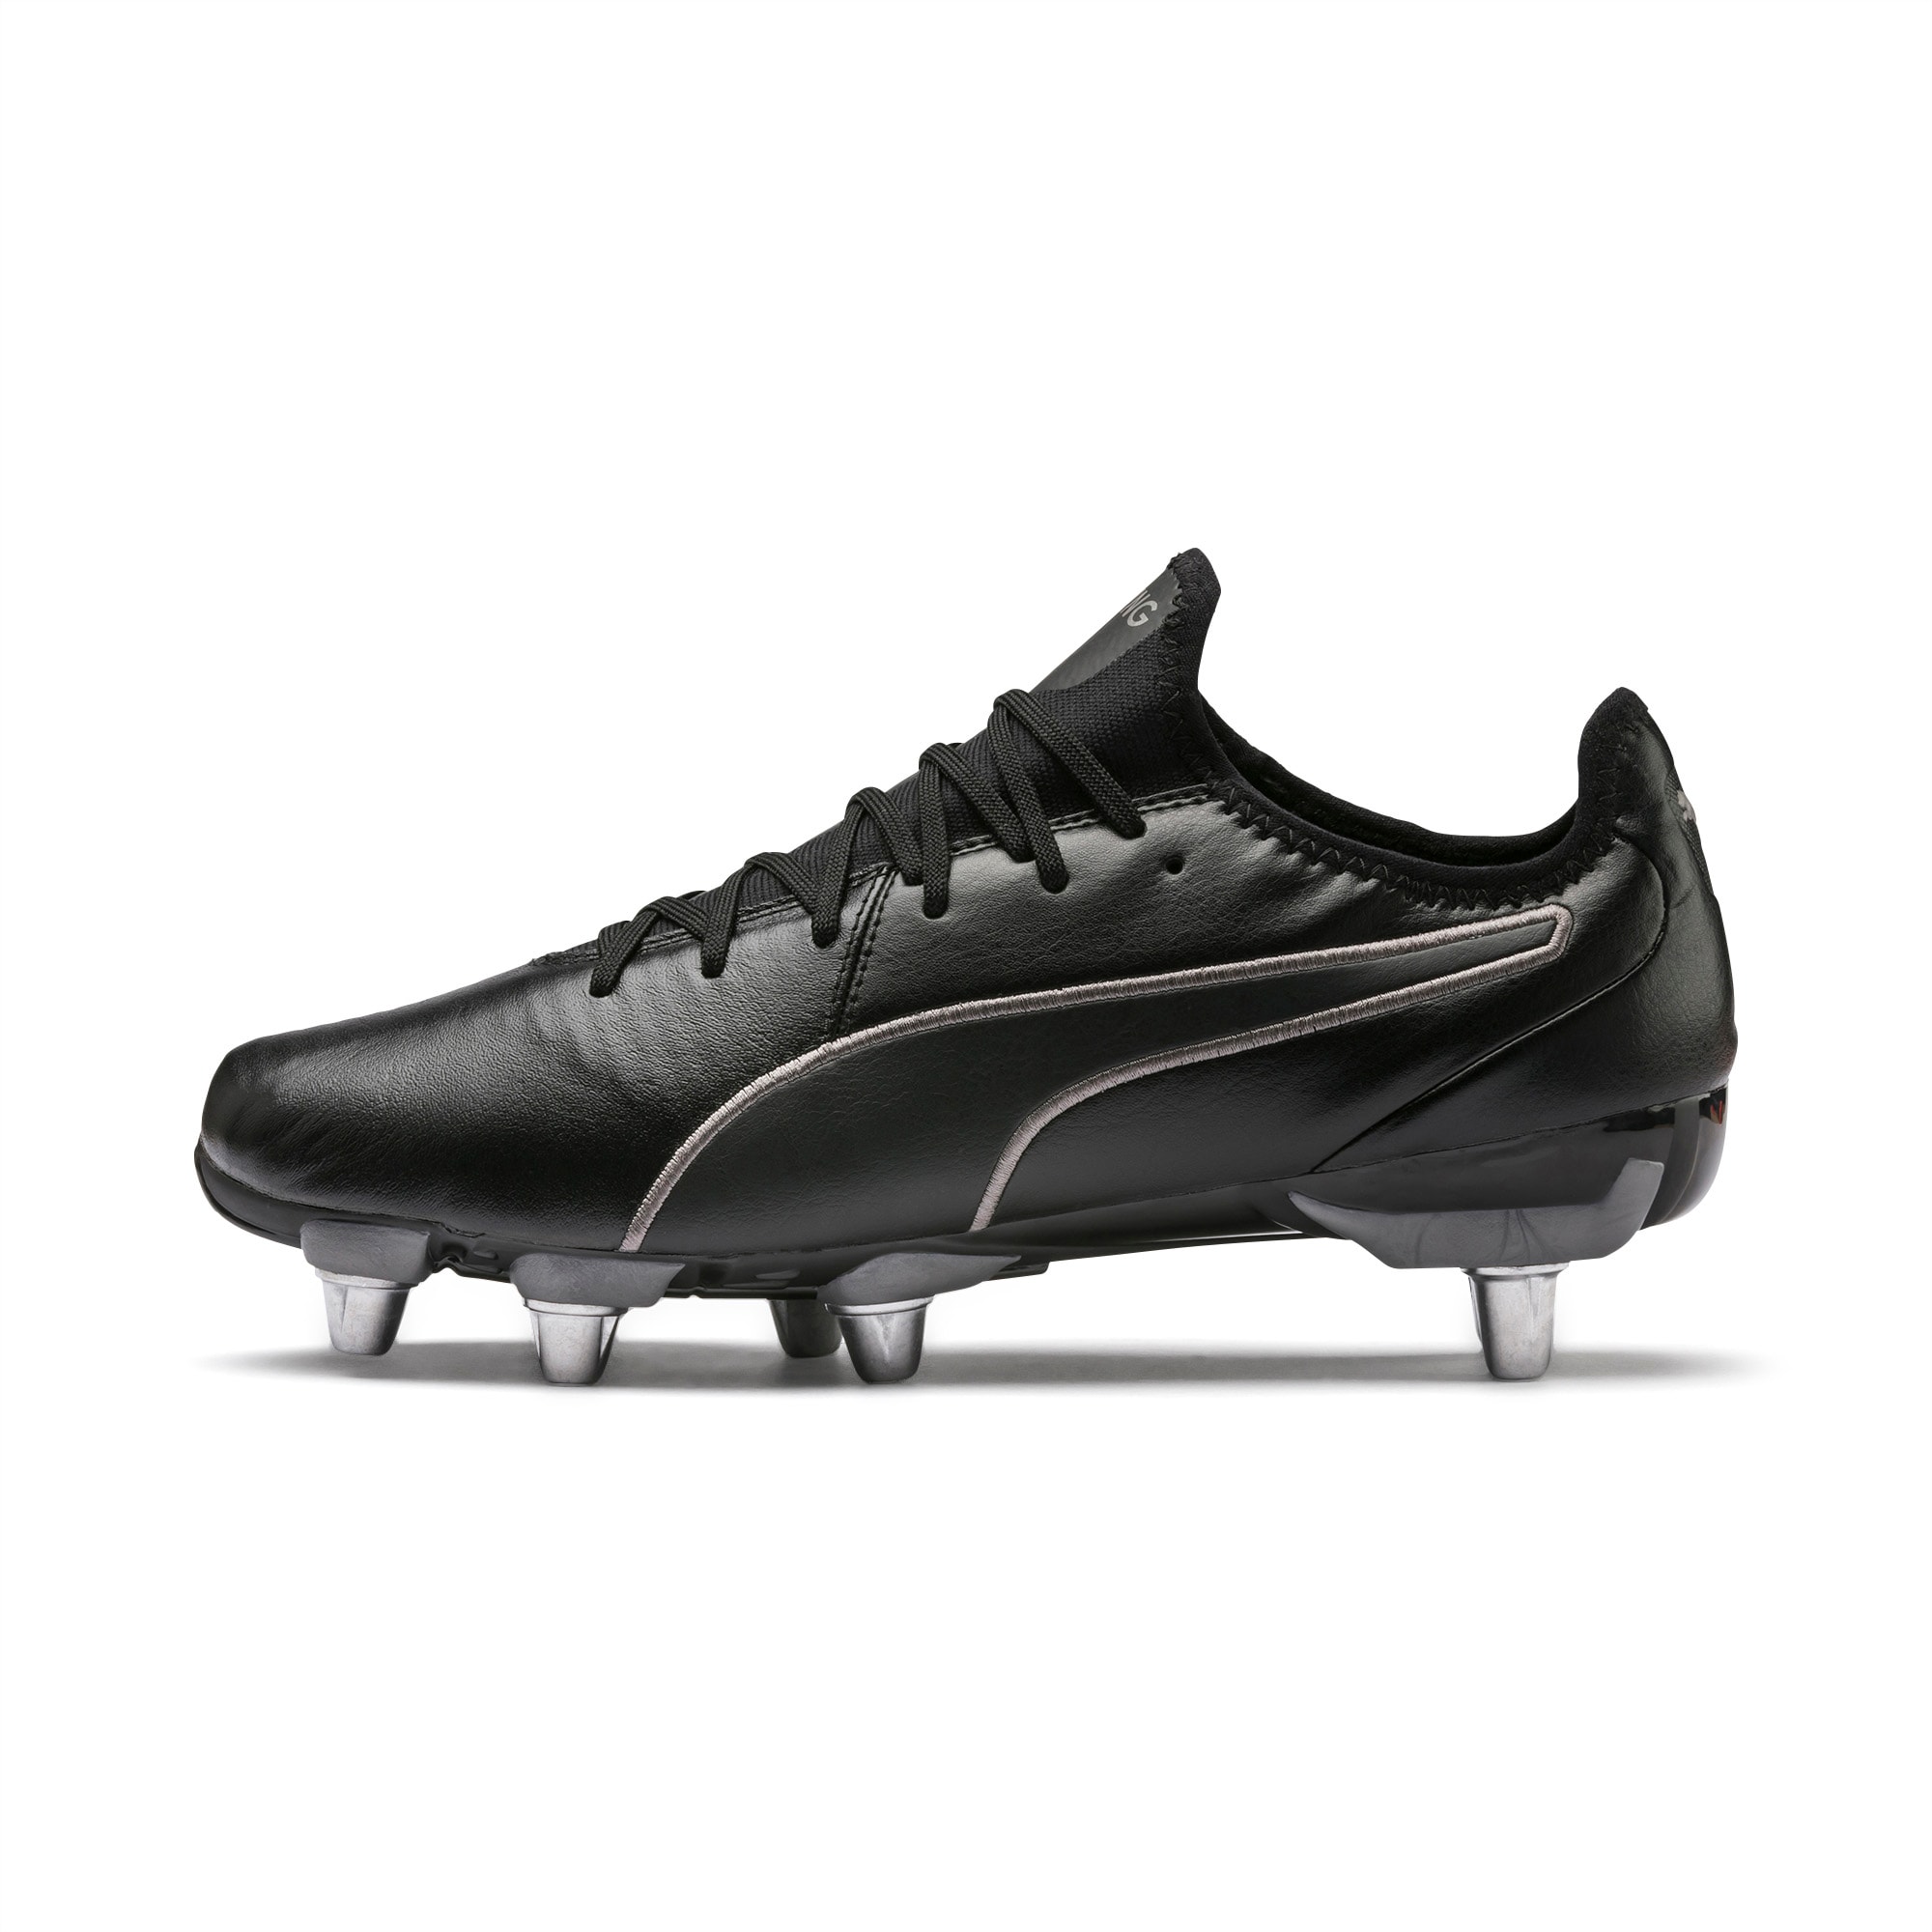 KING Pro H8 Men's Rugby Boots